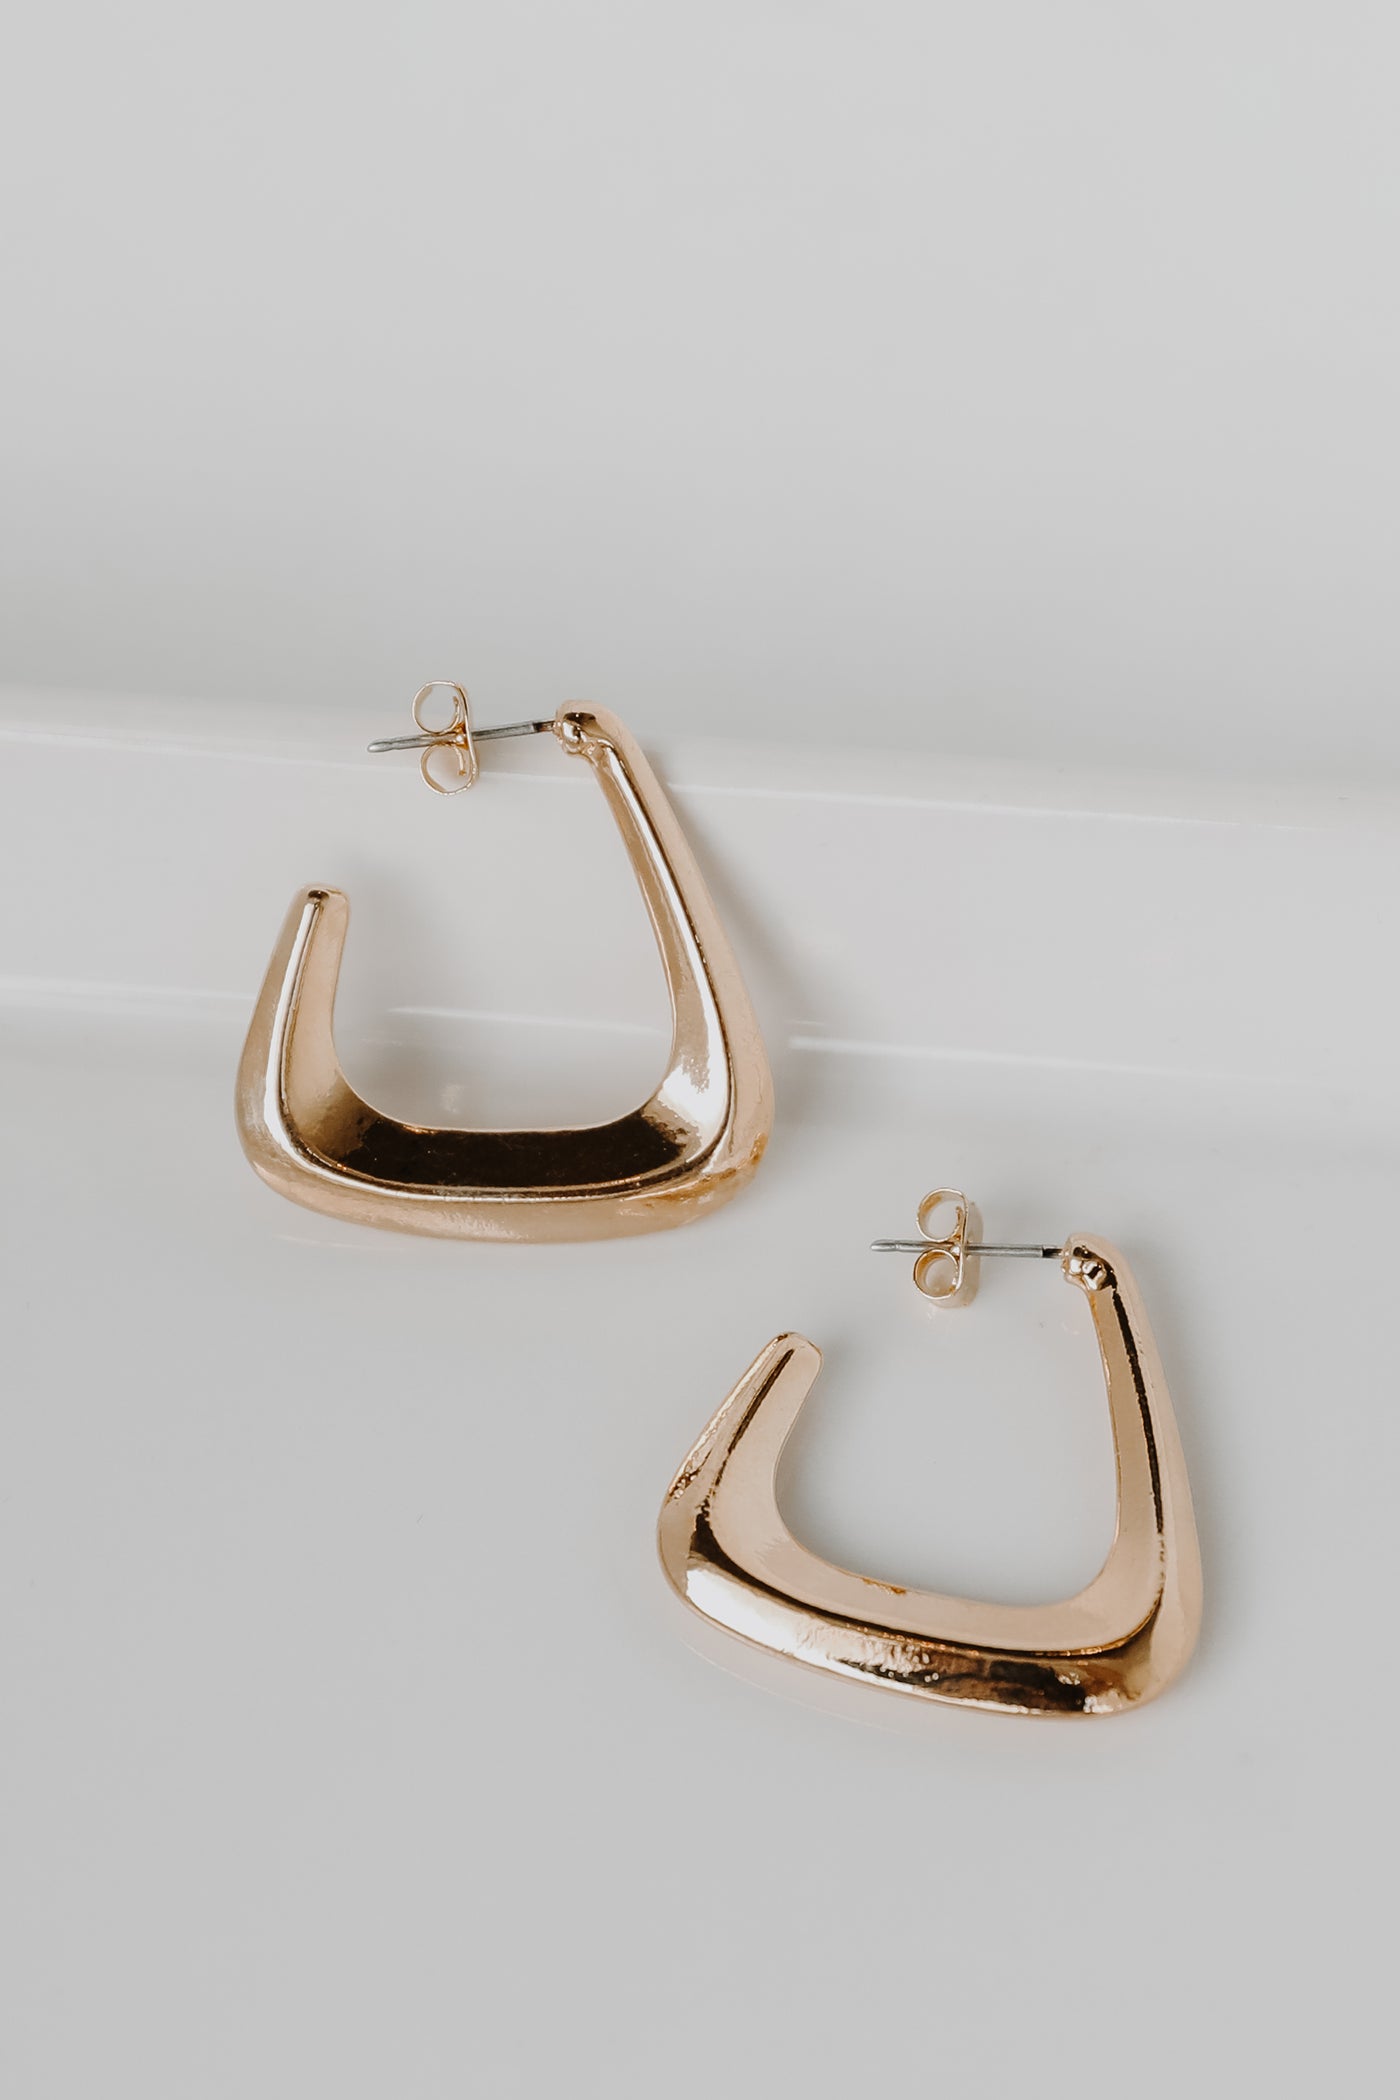 Gold Square Hoop Earrings from dress up